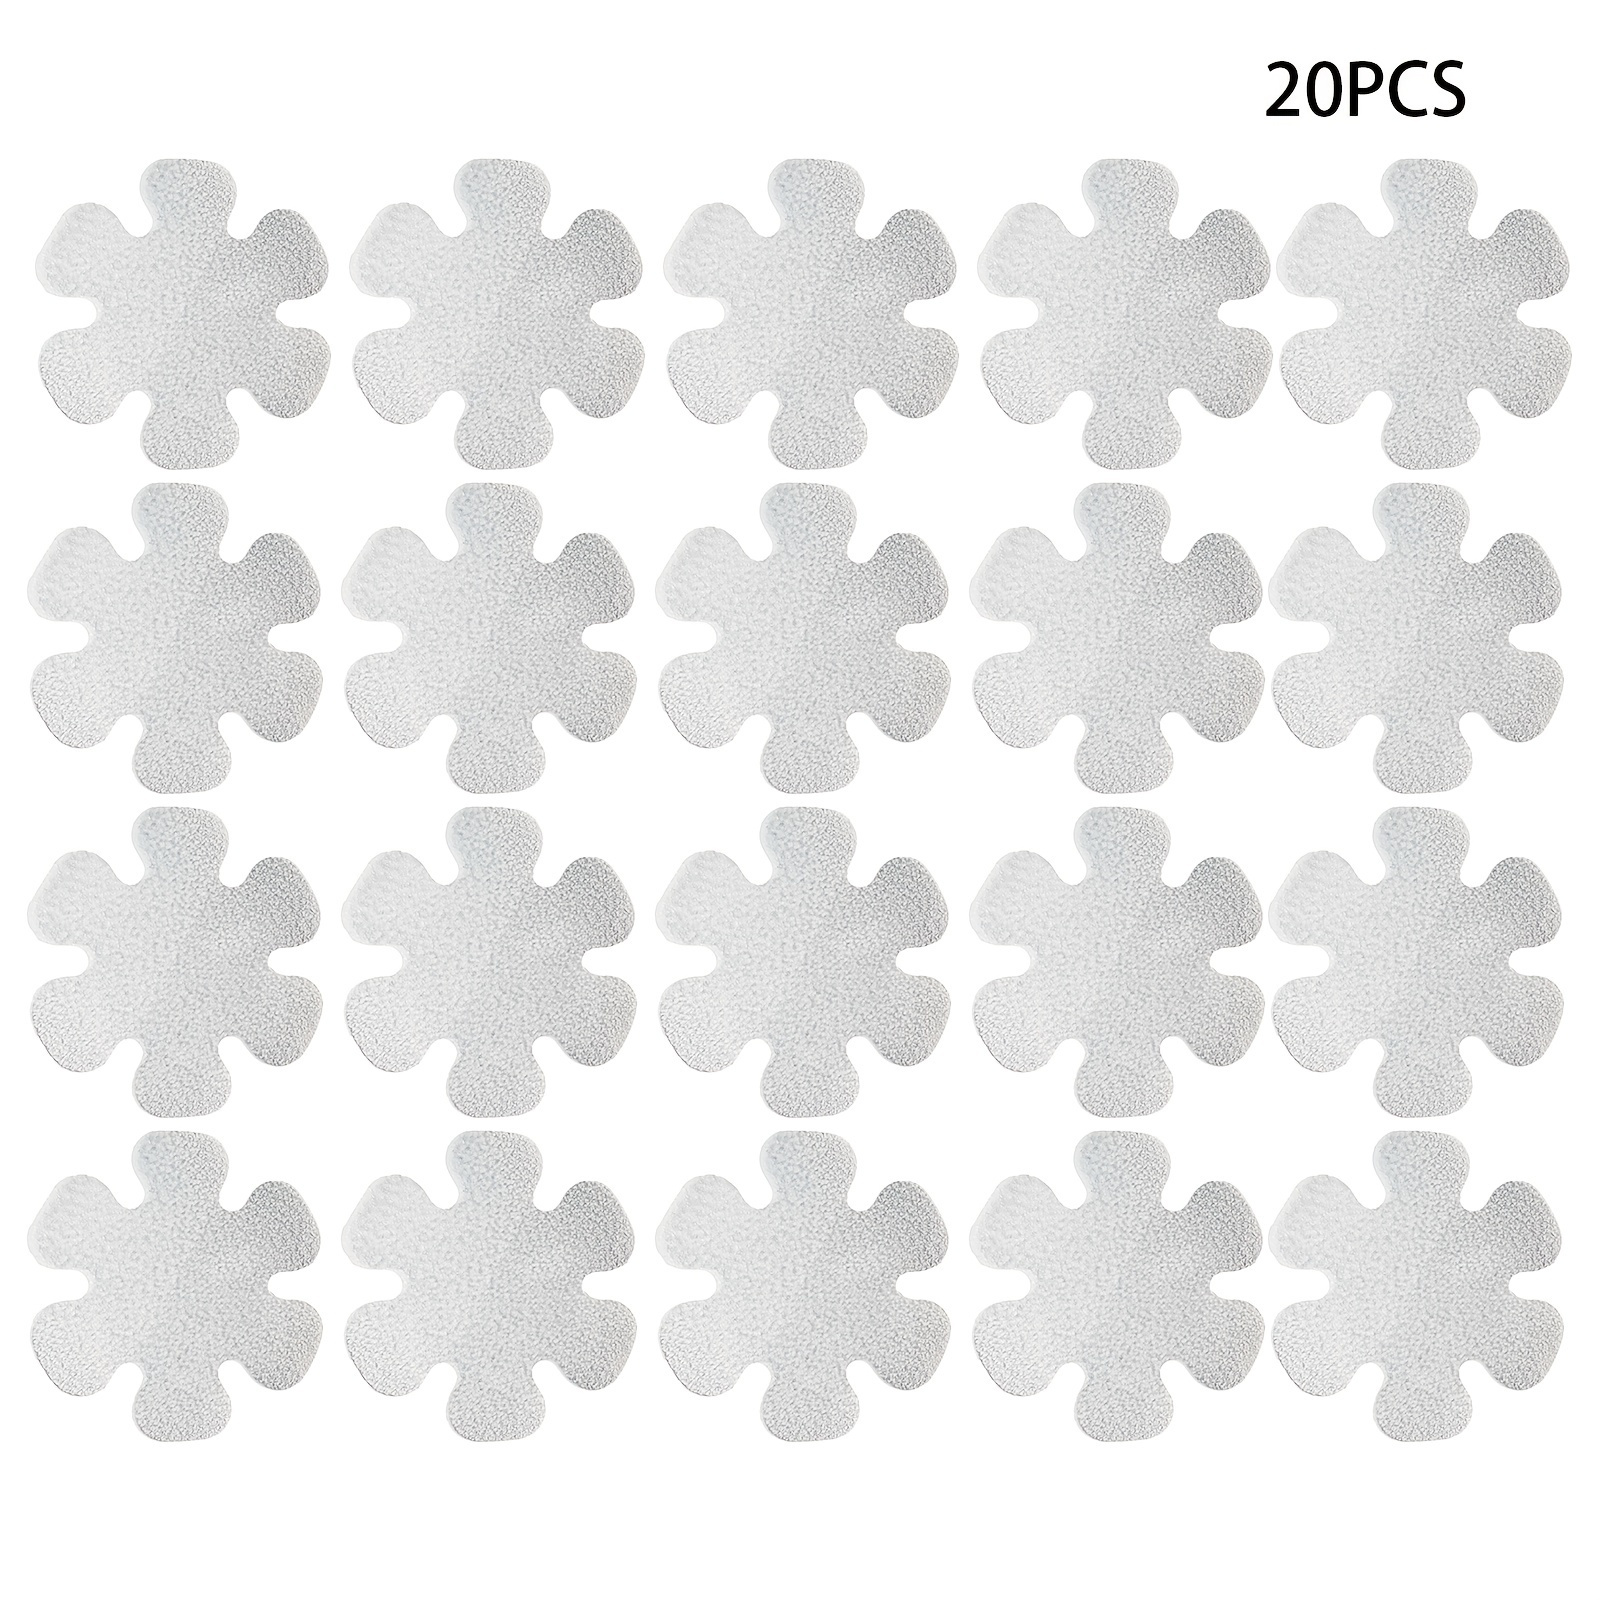 

20pcs Snowflake Shape Non-slip Adhesive Safety Sticker For Bathtub, Lychee Pattern Non-slip Stickers, Adhesive Decals For Bath Tub Shower Stairs Ladders Boats, Bathroom Accessories